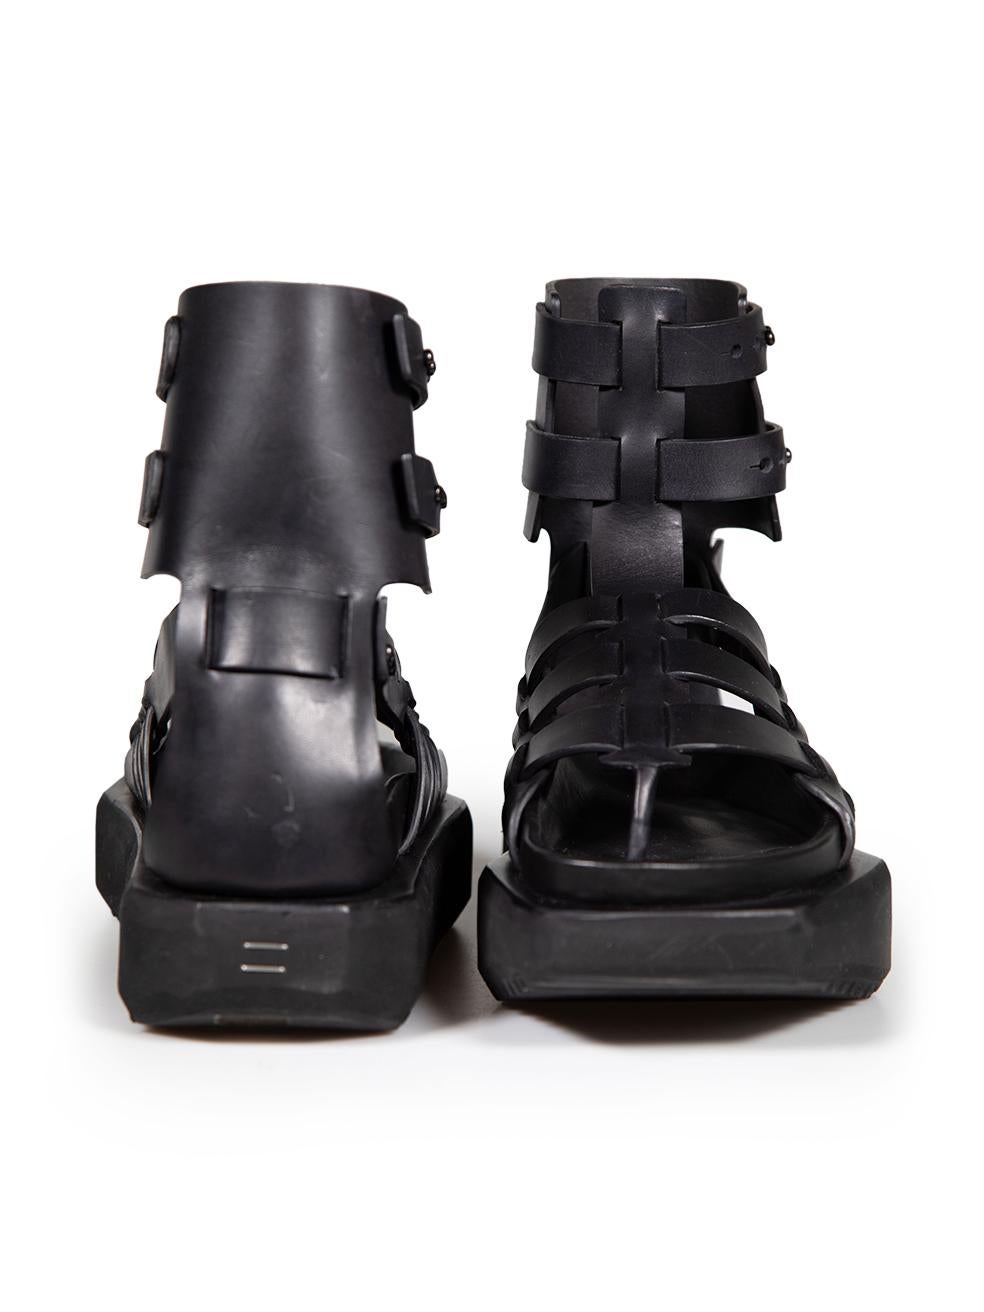 Rick Owens 2016 S/S Black Leather Turbo Cyclop Sandals Size IT 39 In Good Condition For Sale In London, GB